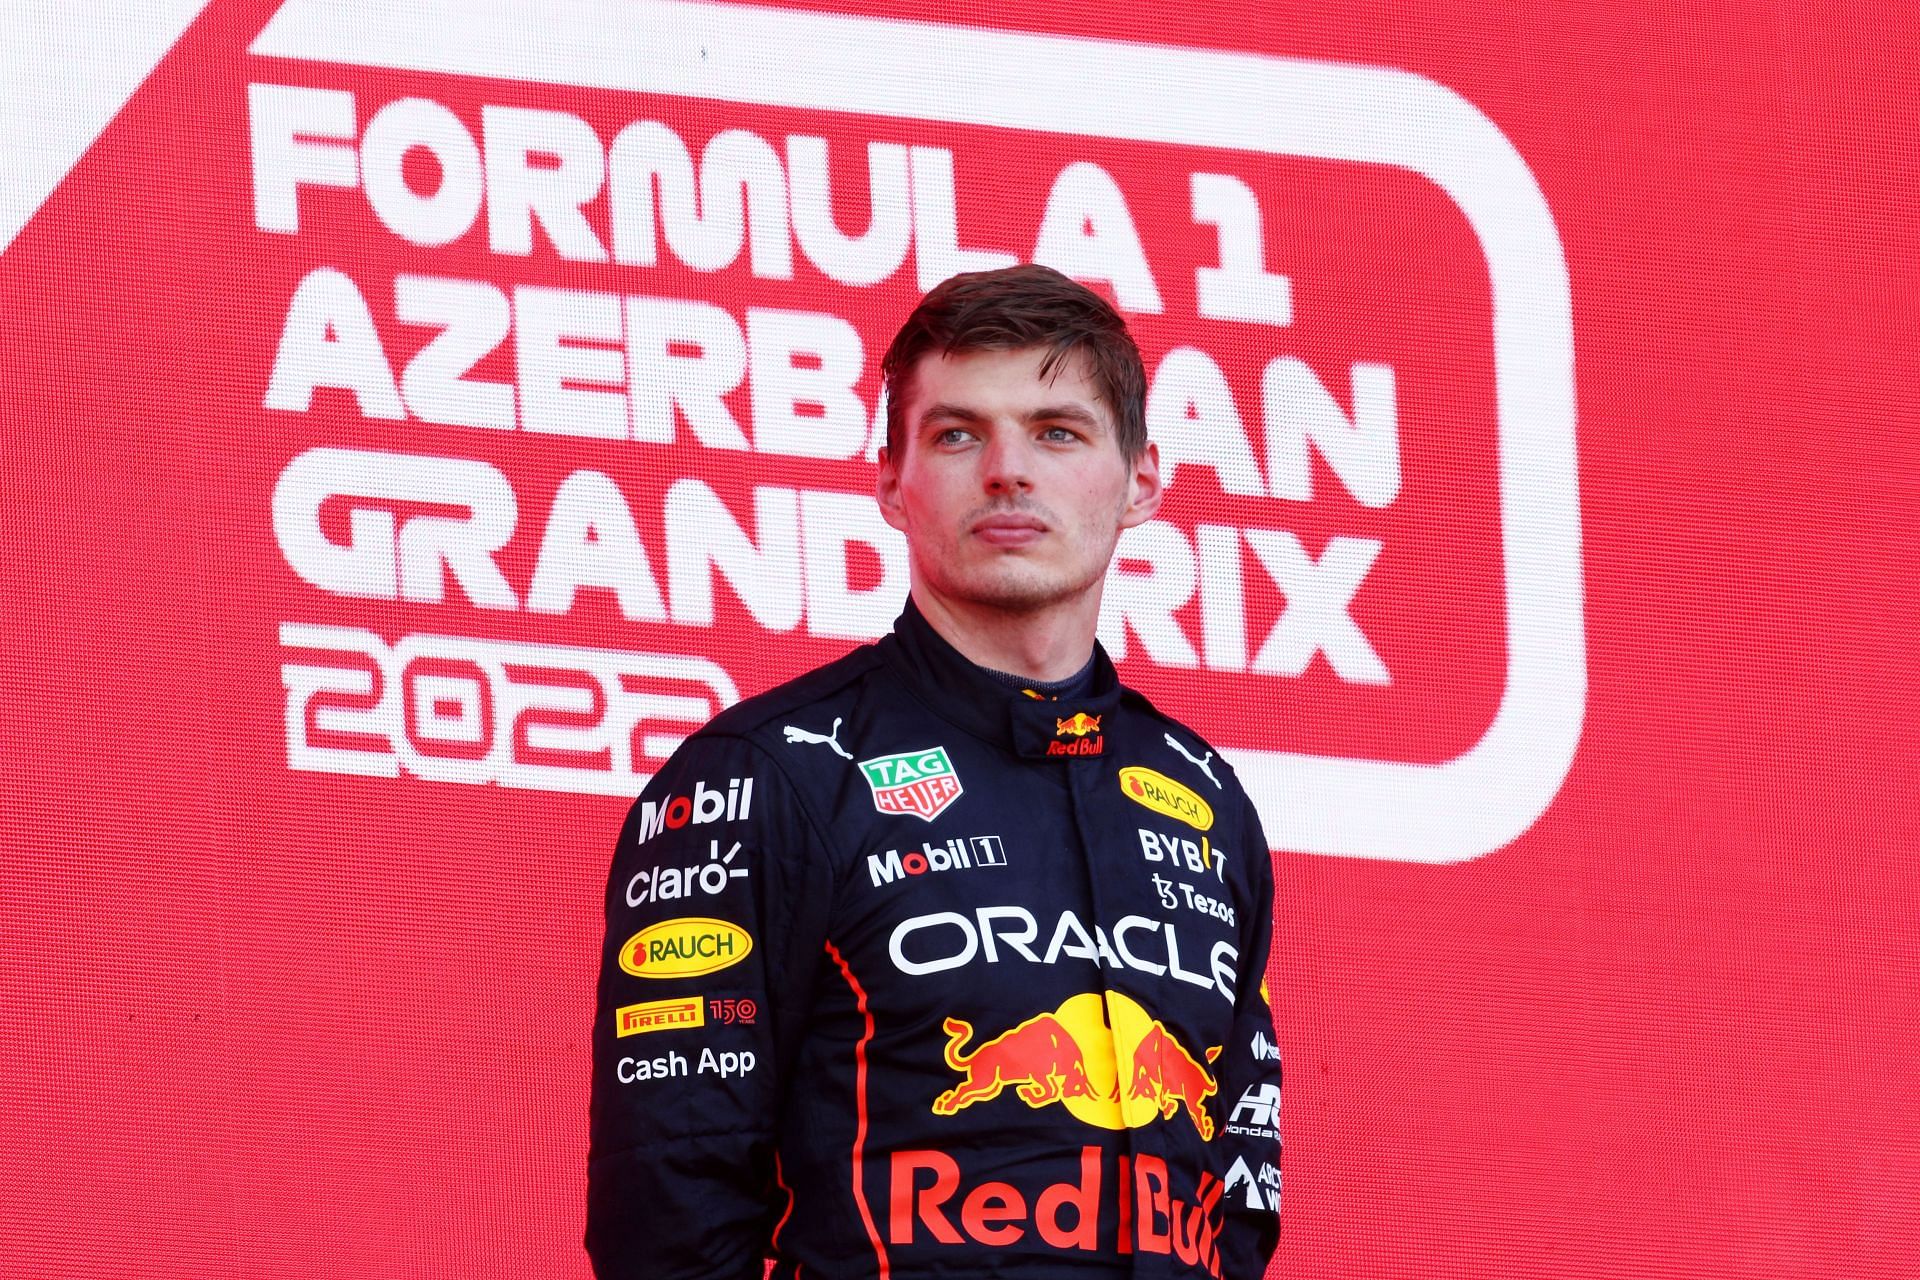 Red Bull driver Max Verstappen on the podium after winning the 2022 F1 Azerbaijan GP (Photo by Clive Rose/Getty Images)